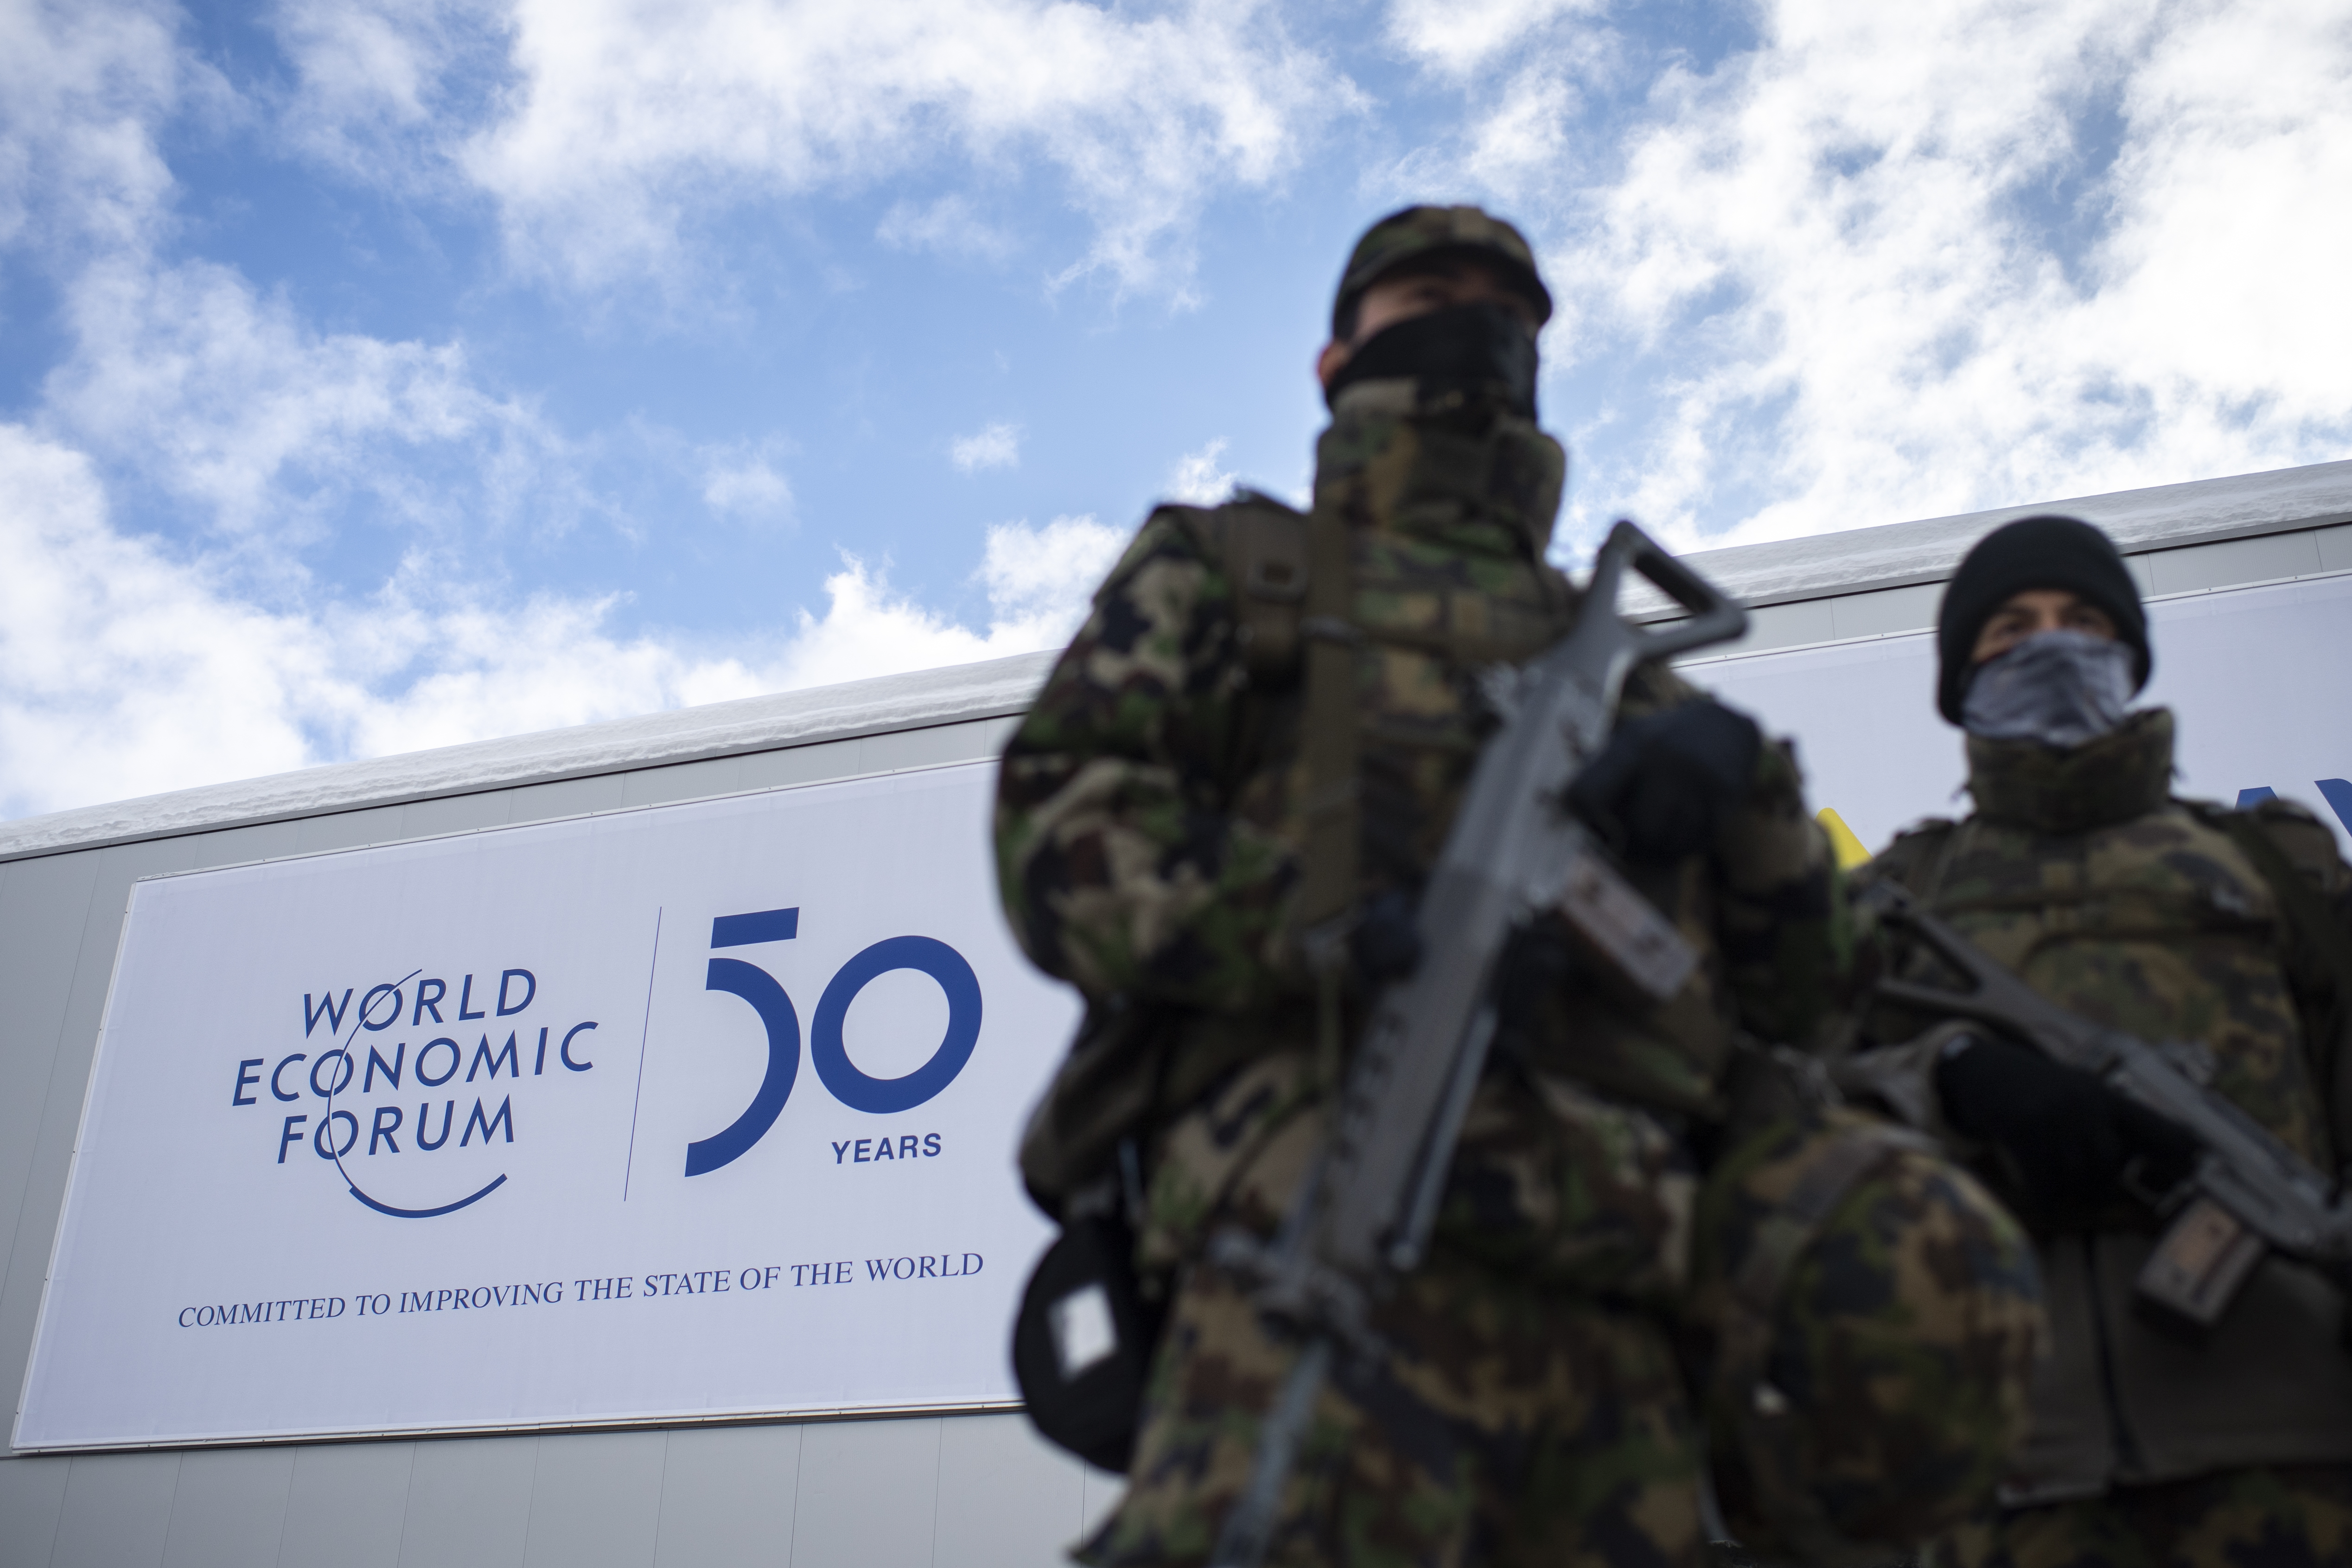 The logo of the WEF is seen behind soldiers of the Swiss Army on guard outside the congress center prior the 50th annual meeting of the World Economic Forum, WEF, in Davos, Switzerland, Sunday, Jan. 19, 2020.  (Gian Ehrenzeller/Keystone via AP)